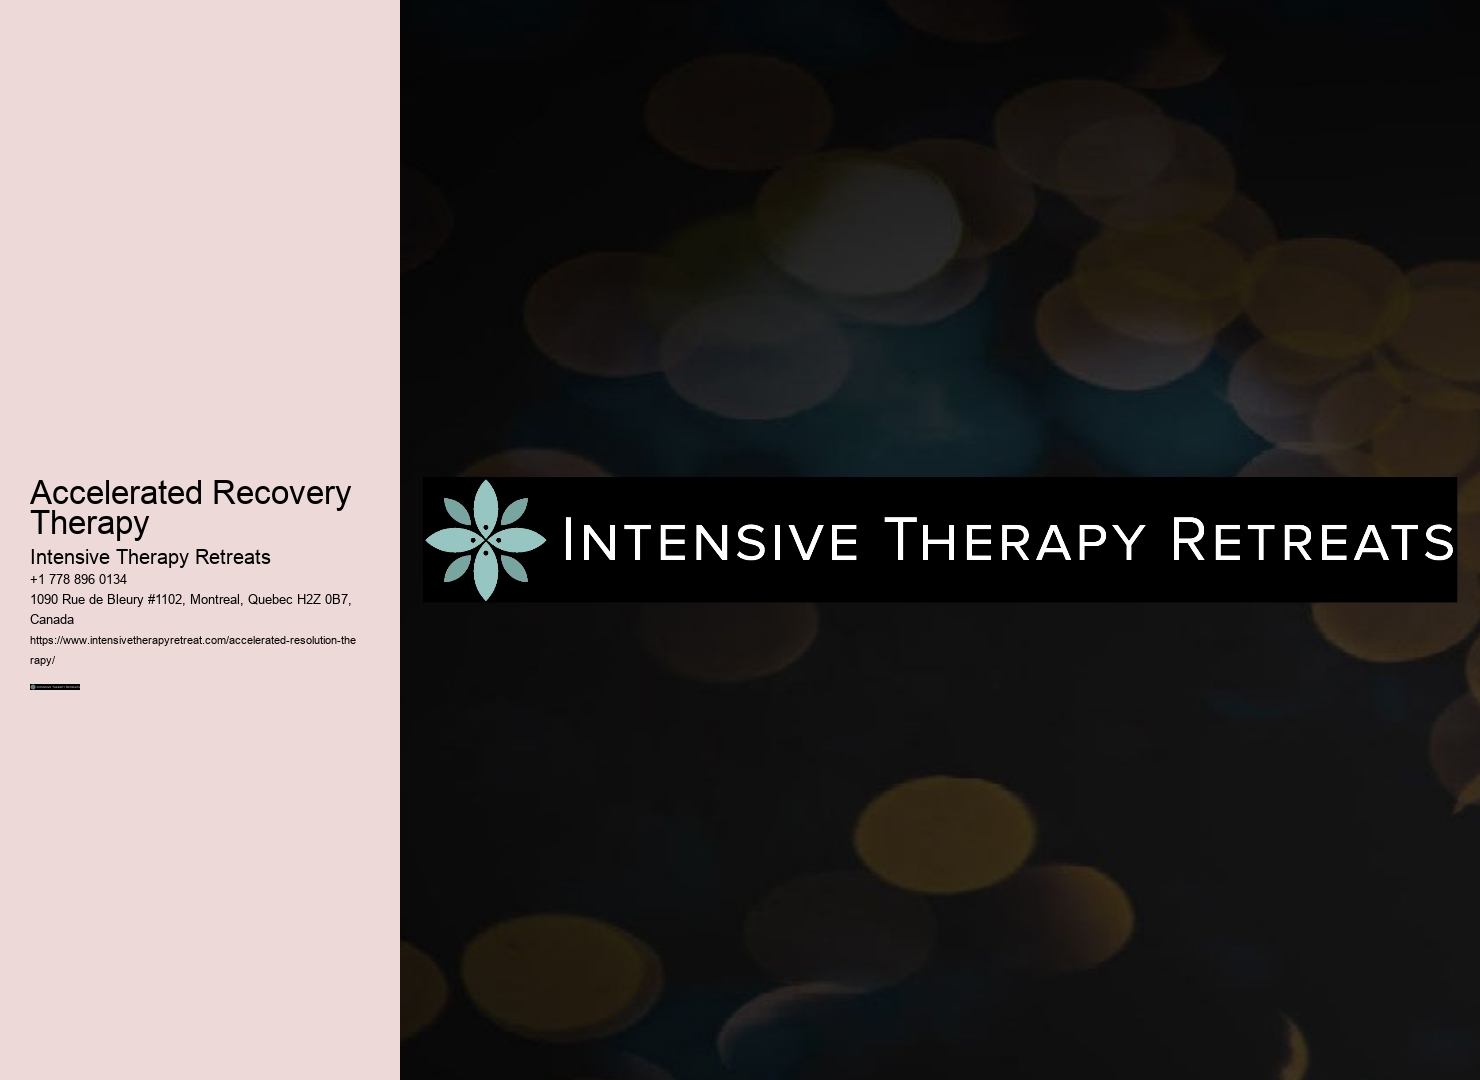 Accelerated Recovery Therapy